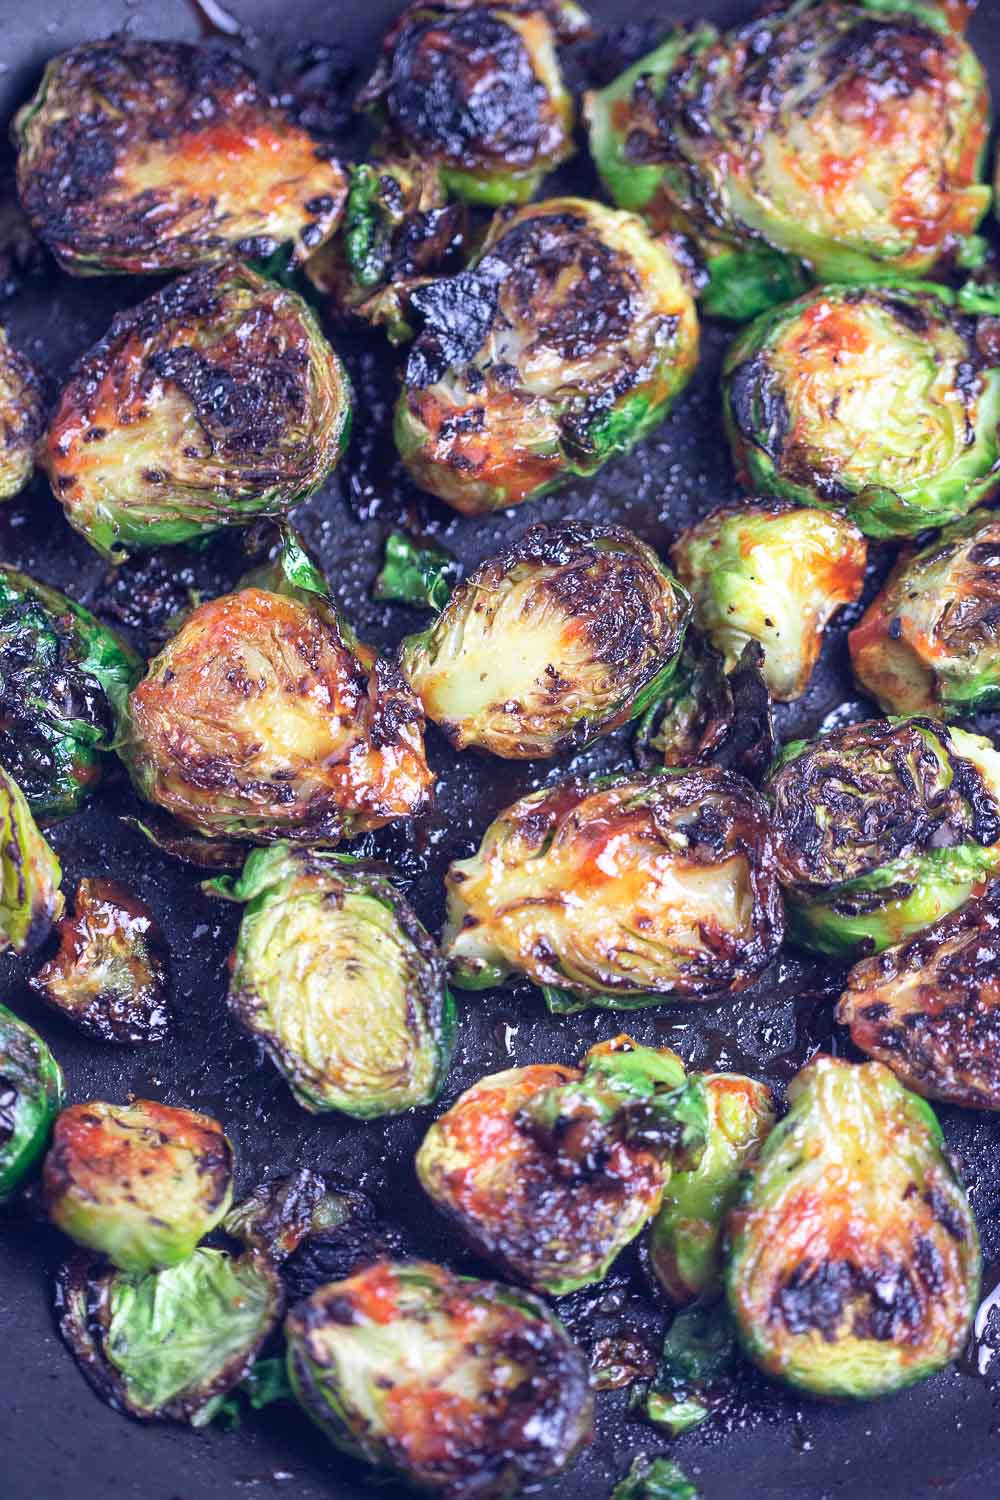 These Honey Sriracha Brussels Sprouts make an excellent side dish — sweet and fiery at the same time!